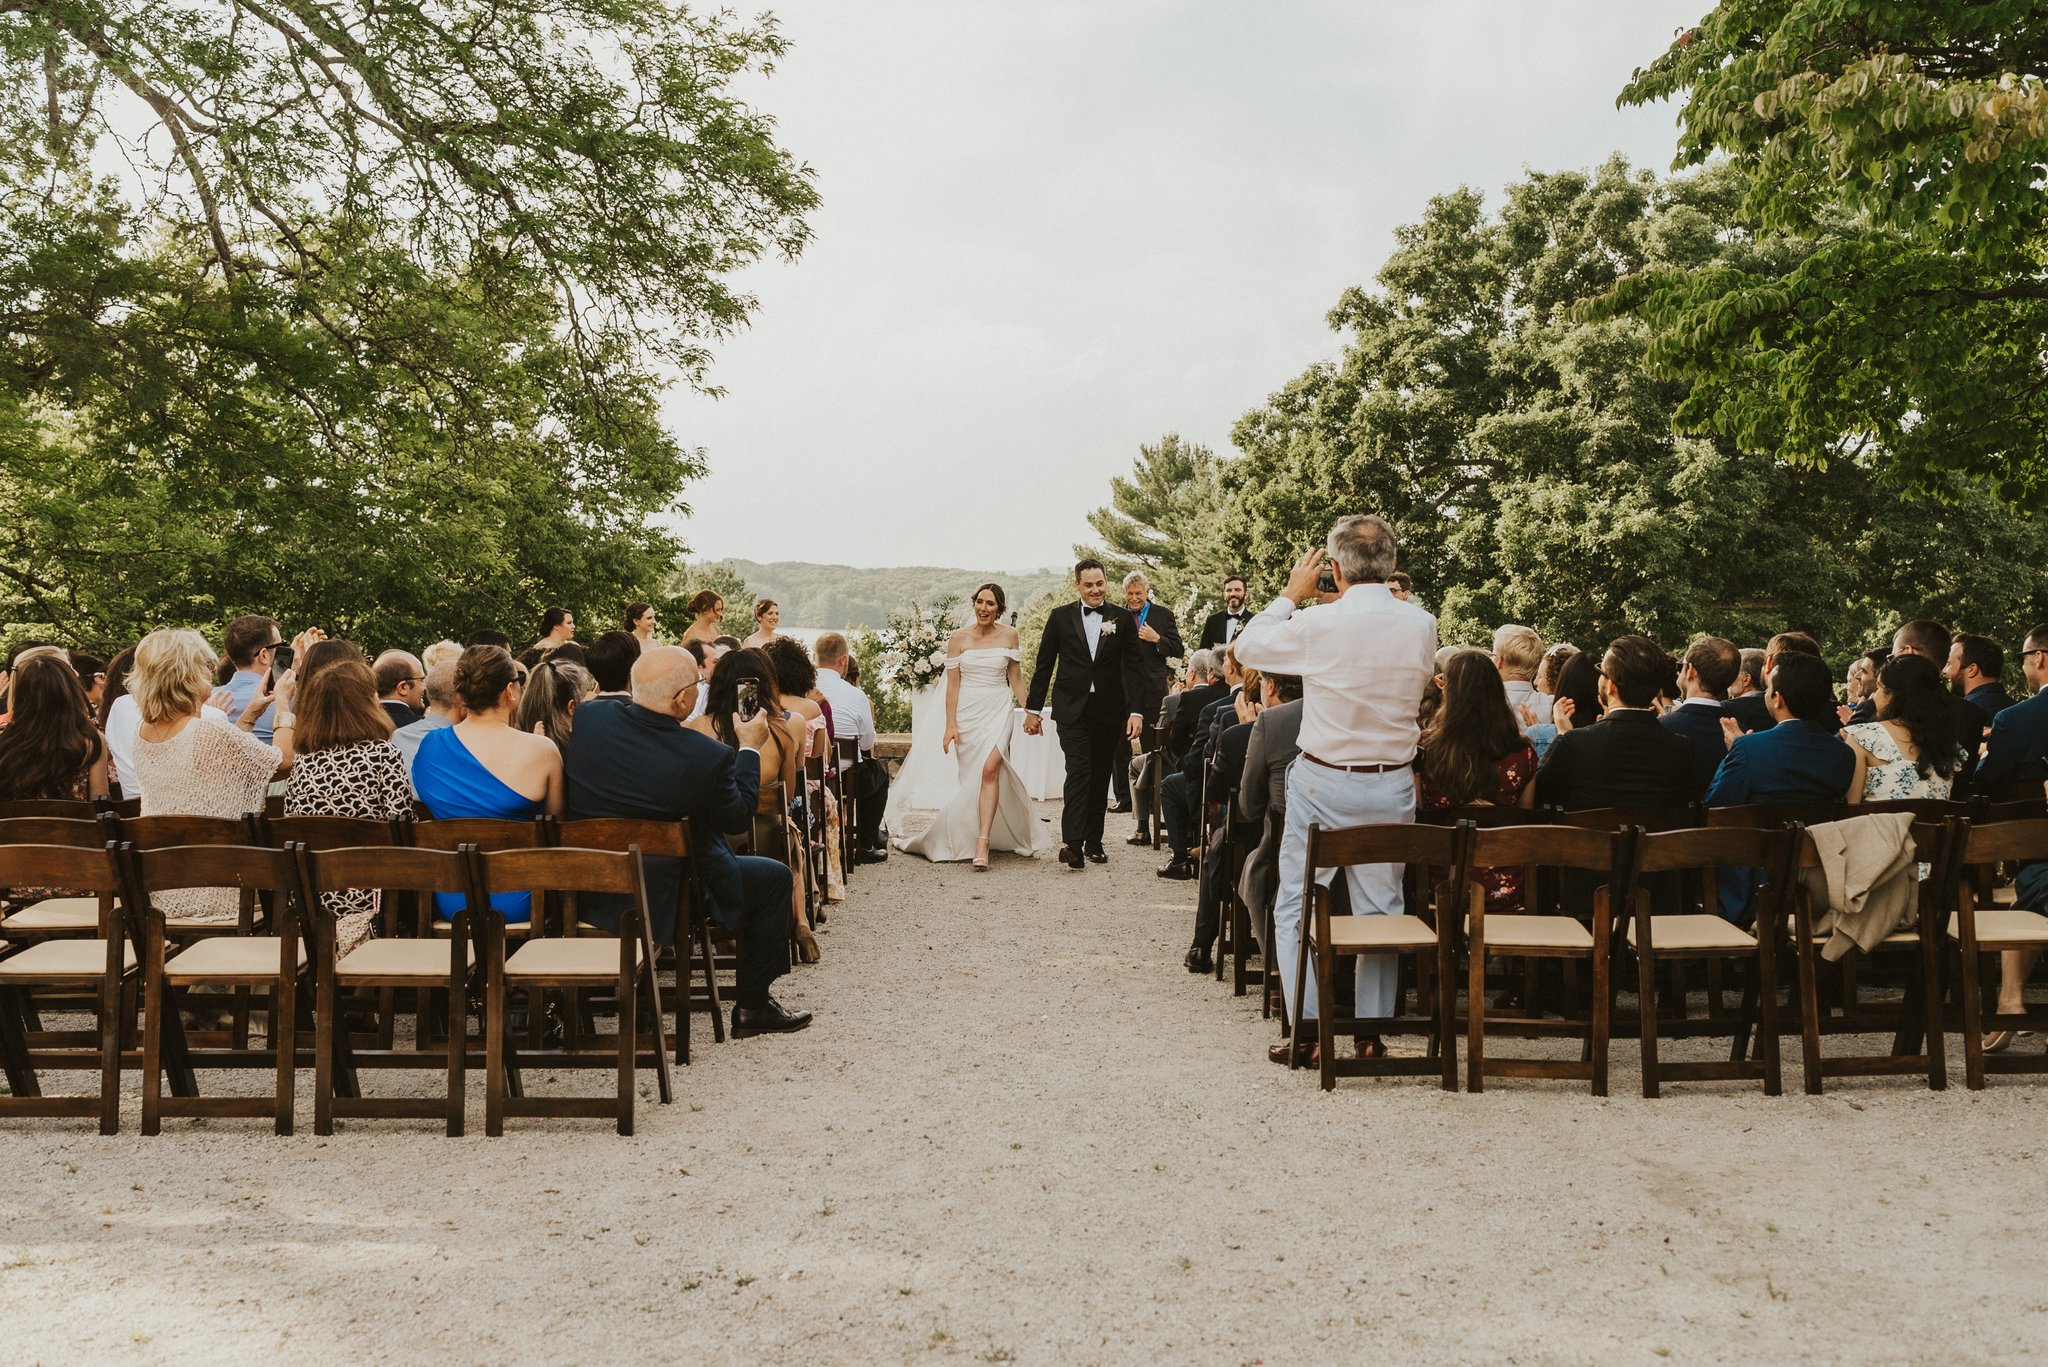 Fruitwood Garden Chairs at A Ceremony